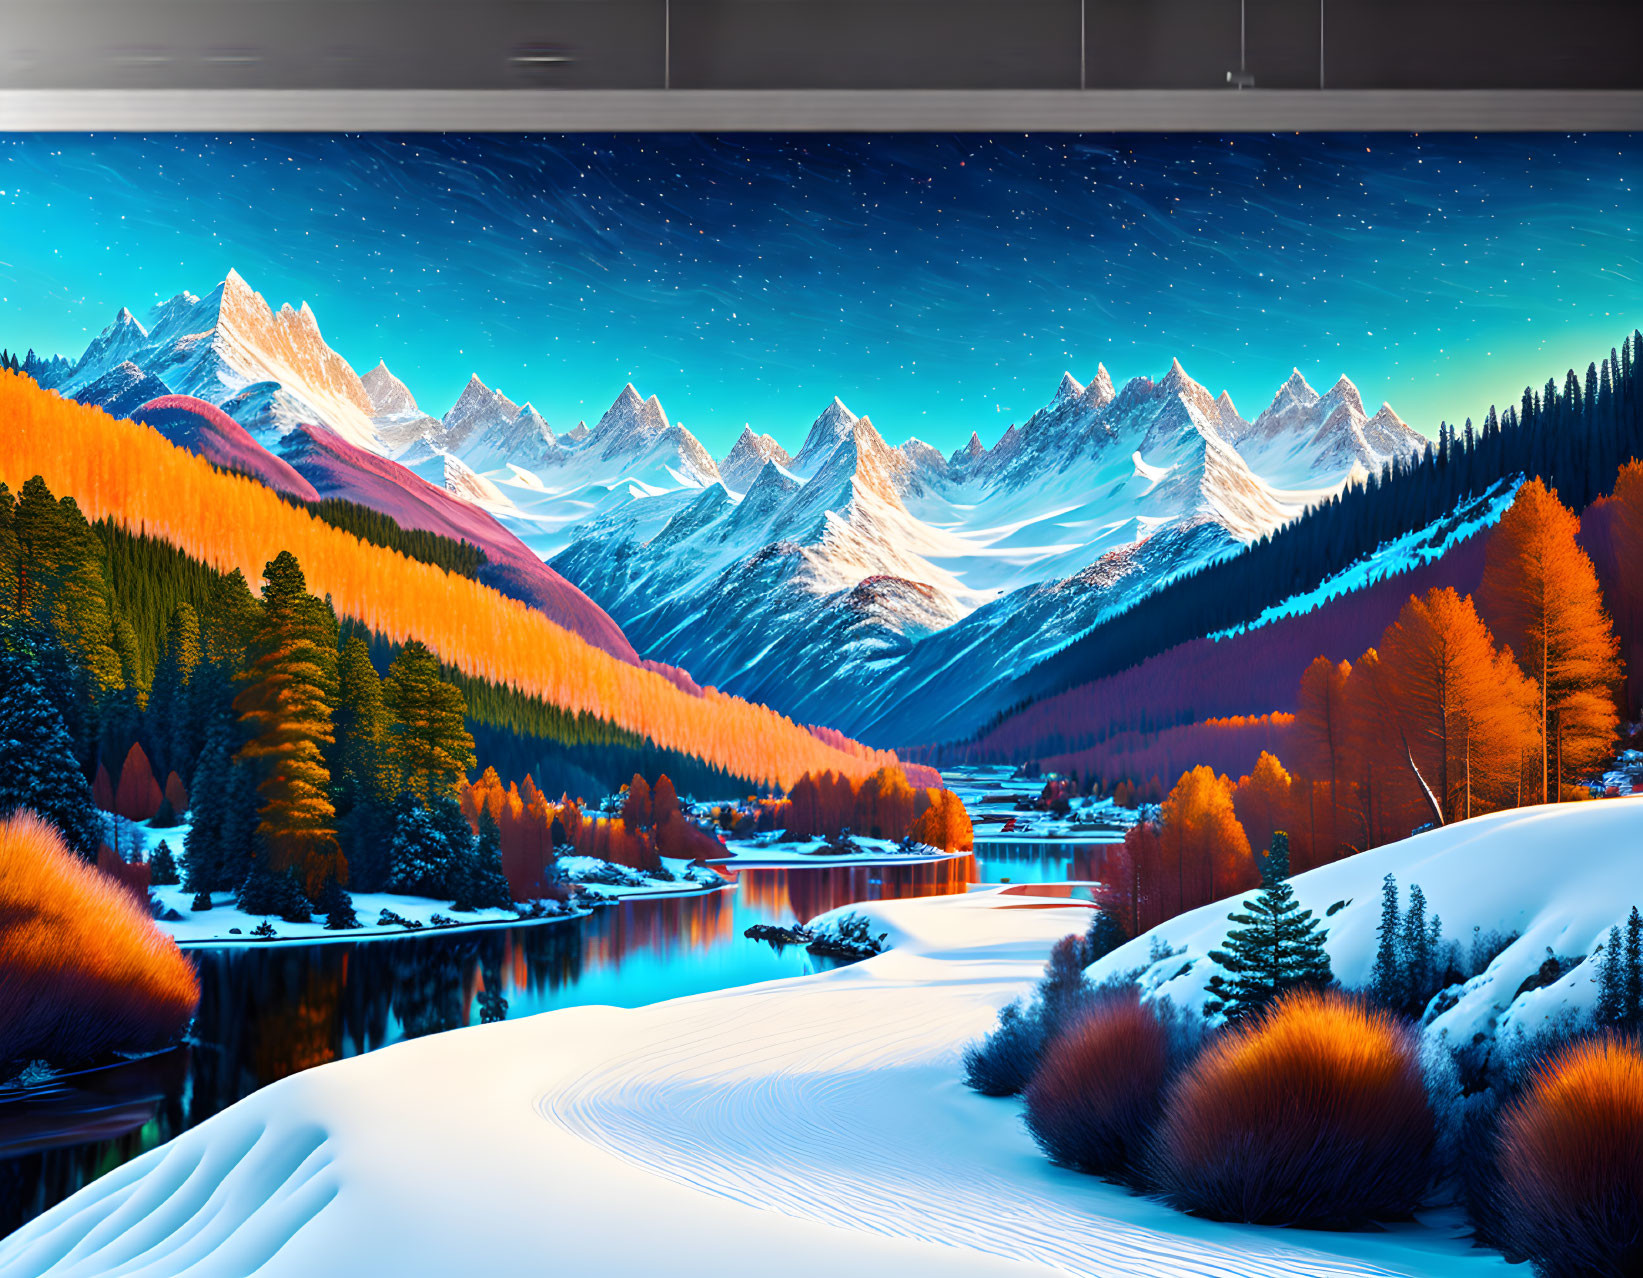 Digital Art: Snowy Landscape with River, Autumn Trees, and Mountains